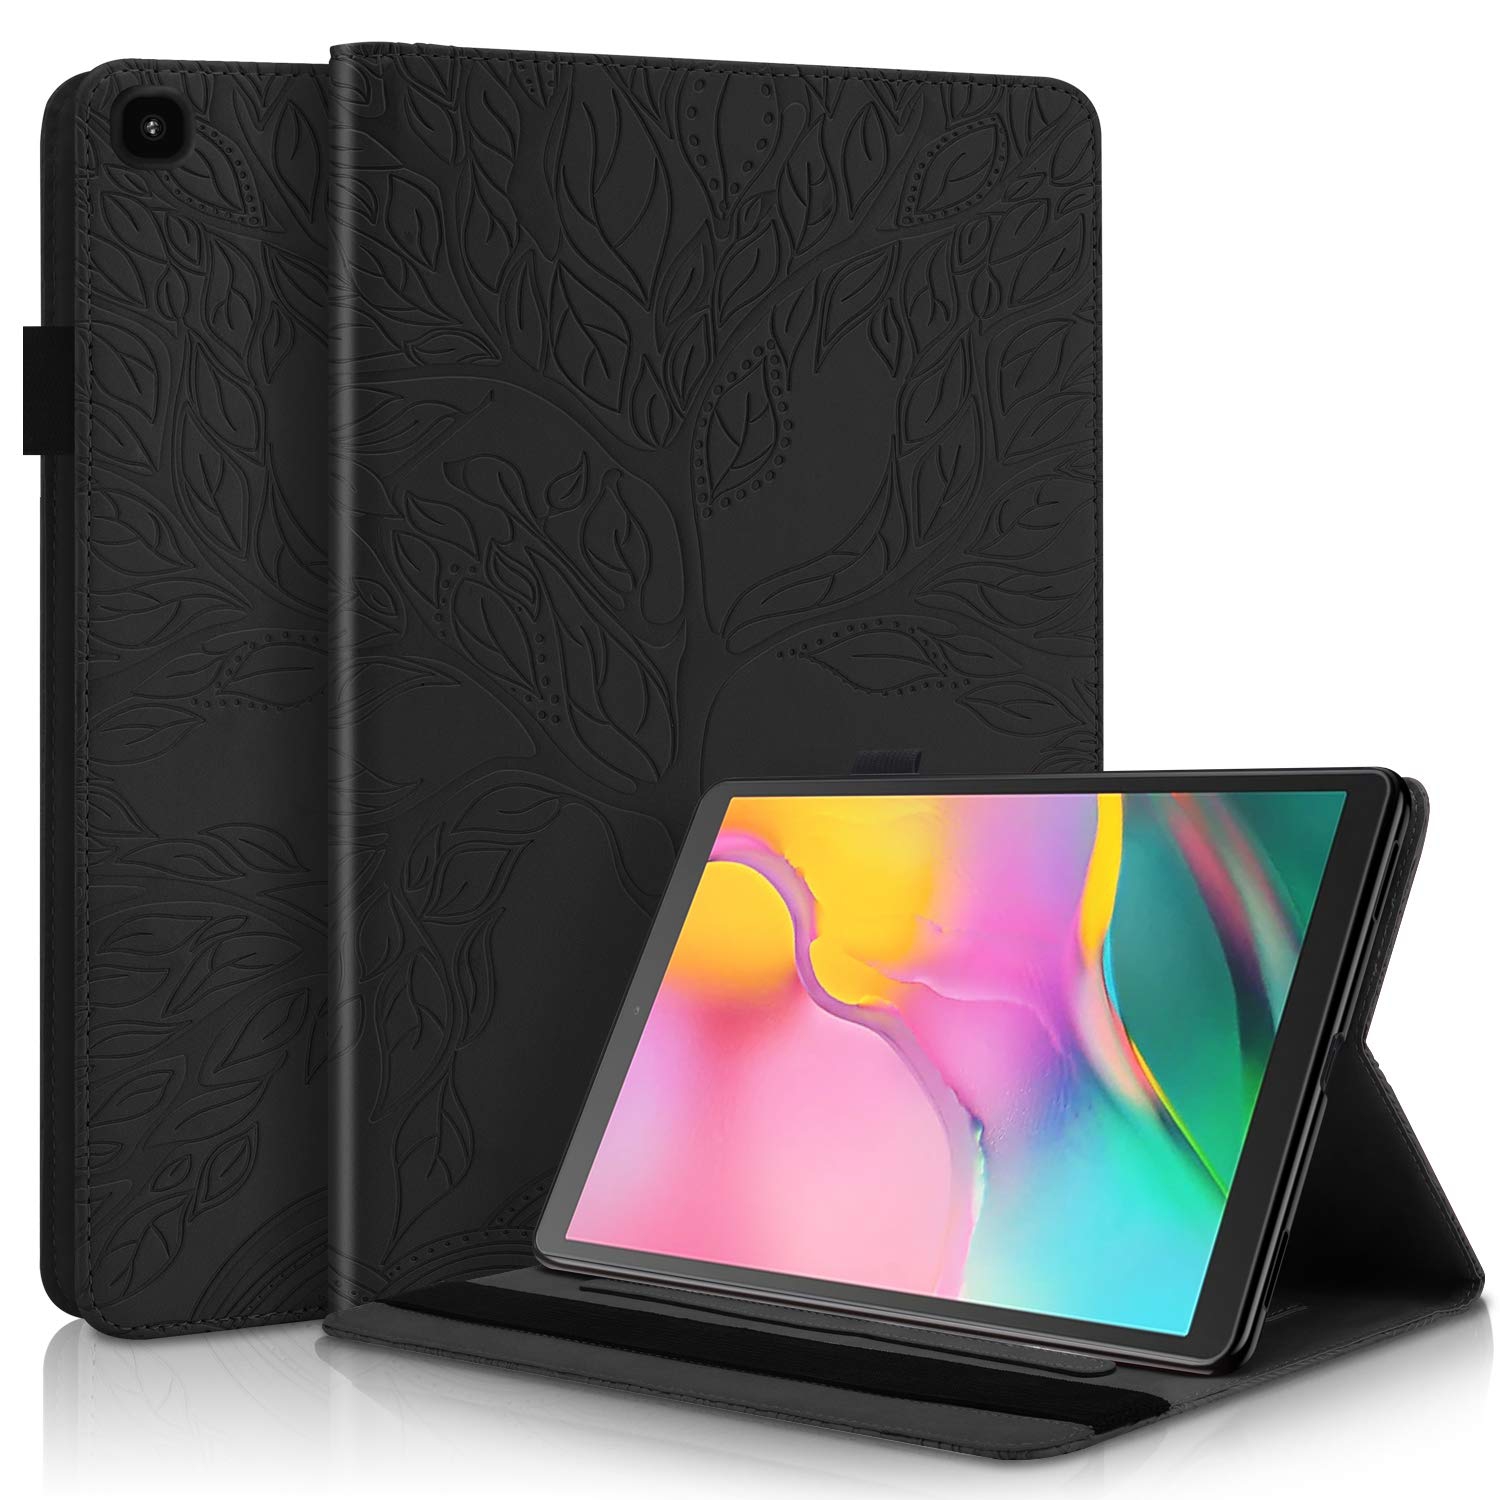 Case for Samsung Galaxy Tab S6 Lite 2022 / S6 Lite 2020 10.4'' Premium PU Leather Cover Multi-Angle Folio Stand Shell with C